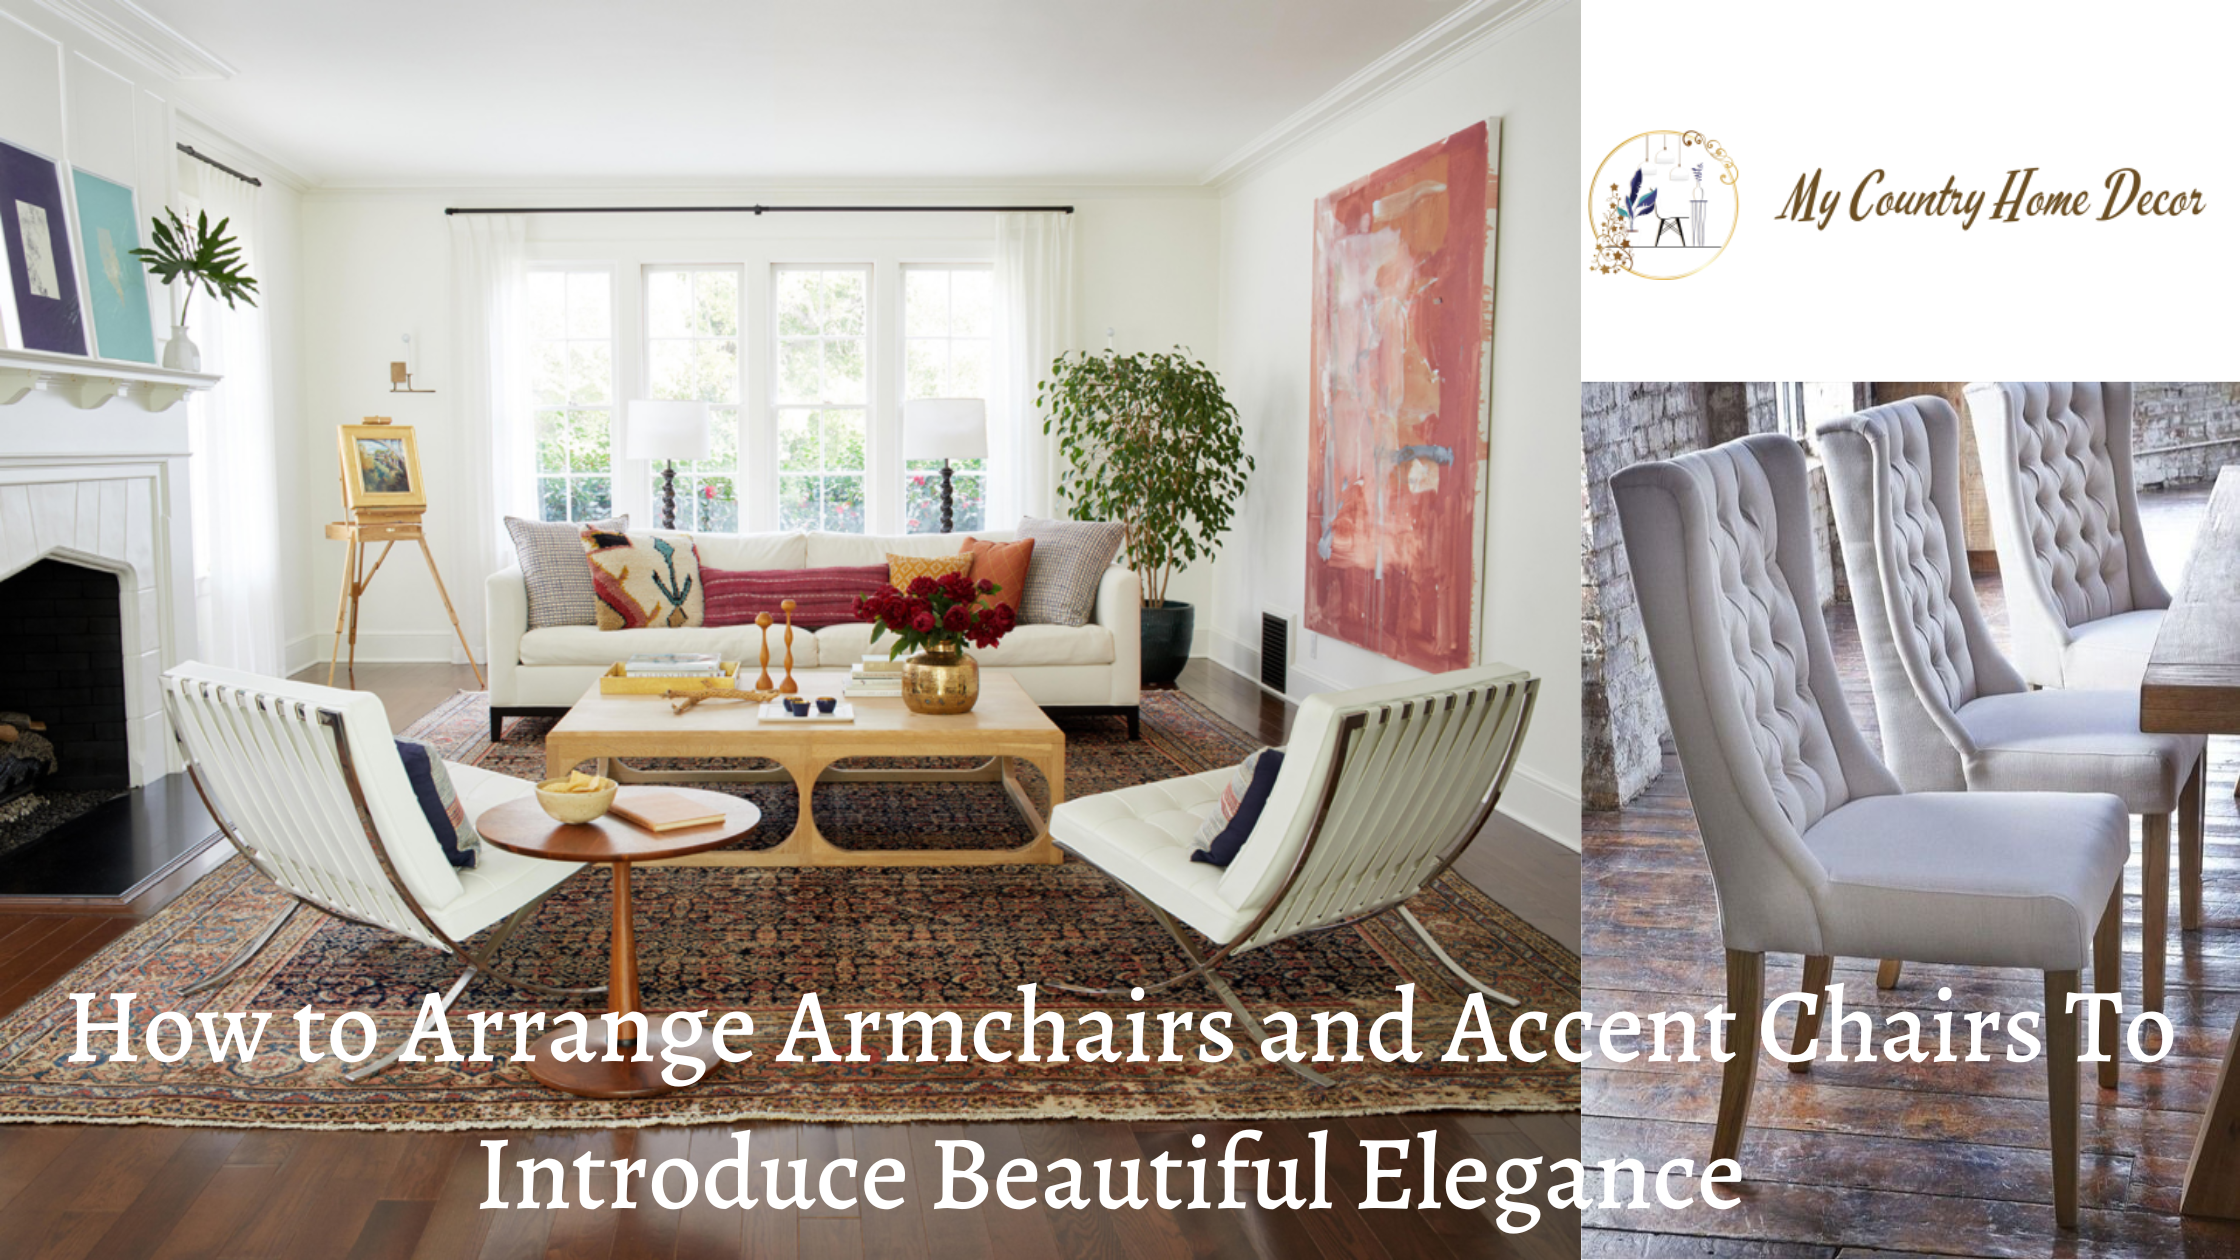 How to Arrange Armchairs and Accent Chairs To Introduce Beautiful Elegance